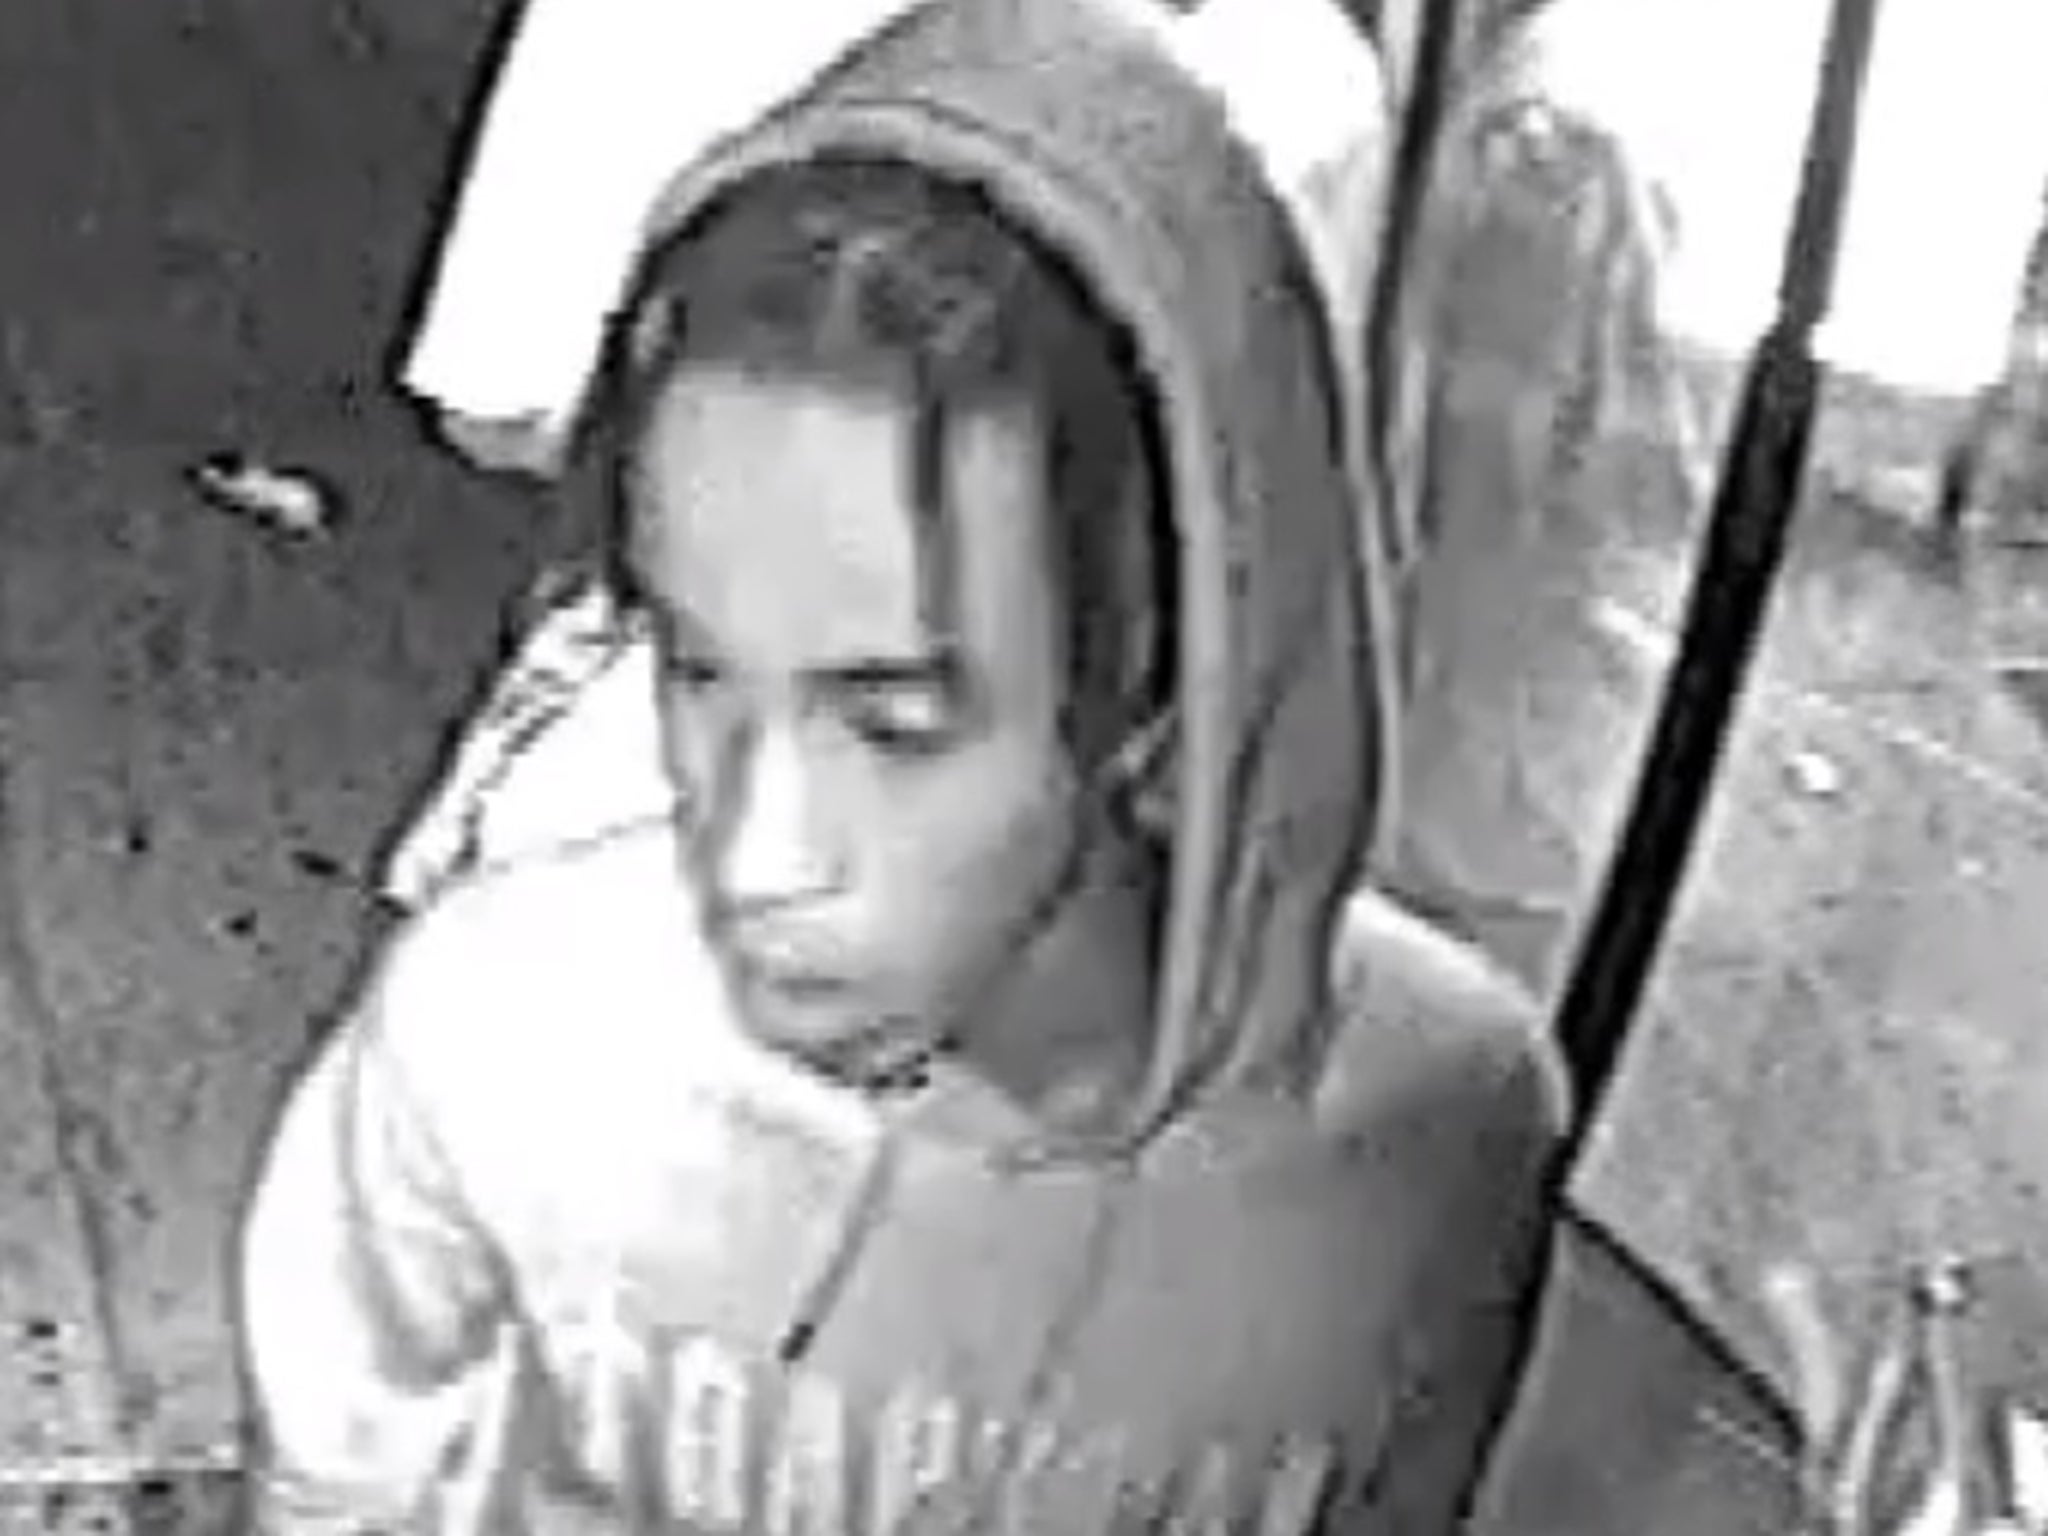 Officers are searching for pictured man in connection with assault